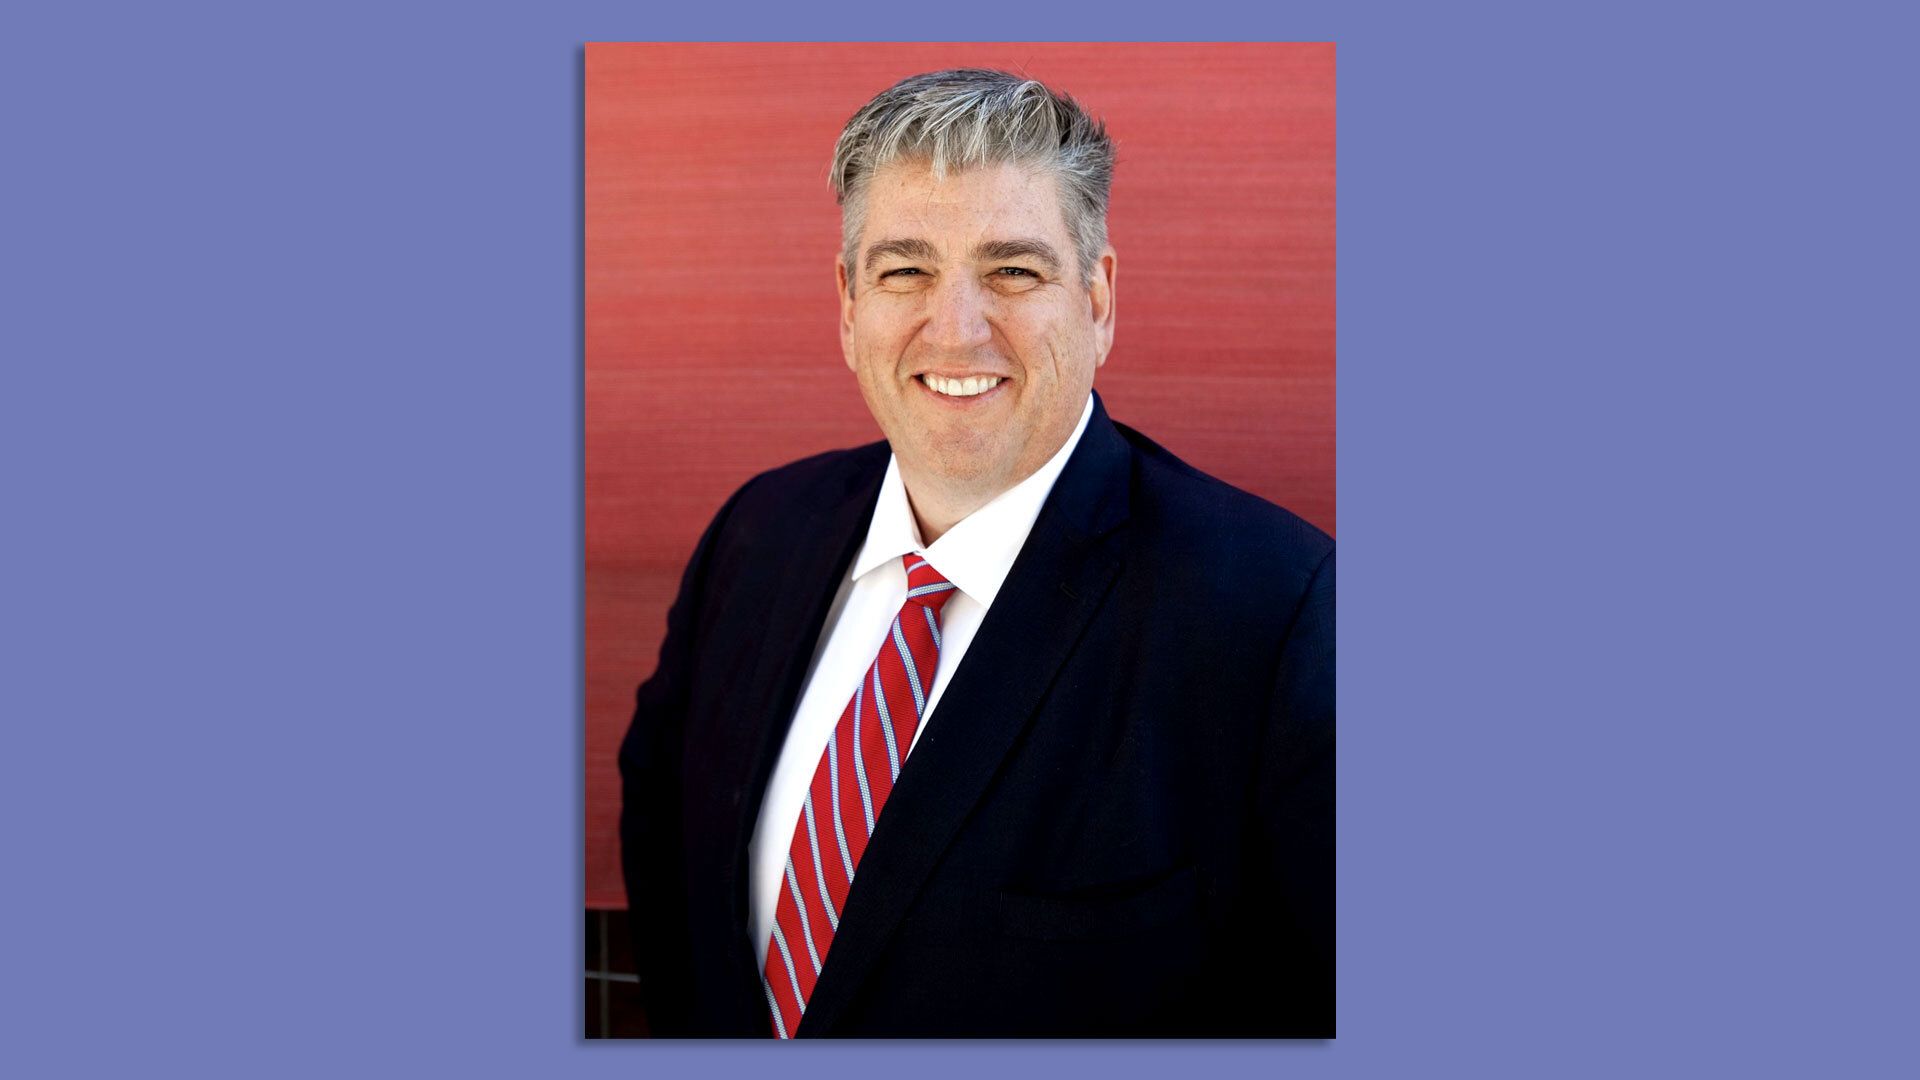 New Mexico state Sen. Mark Moores is seen in a courtesy headshot.